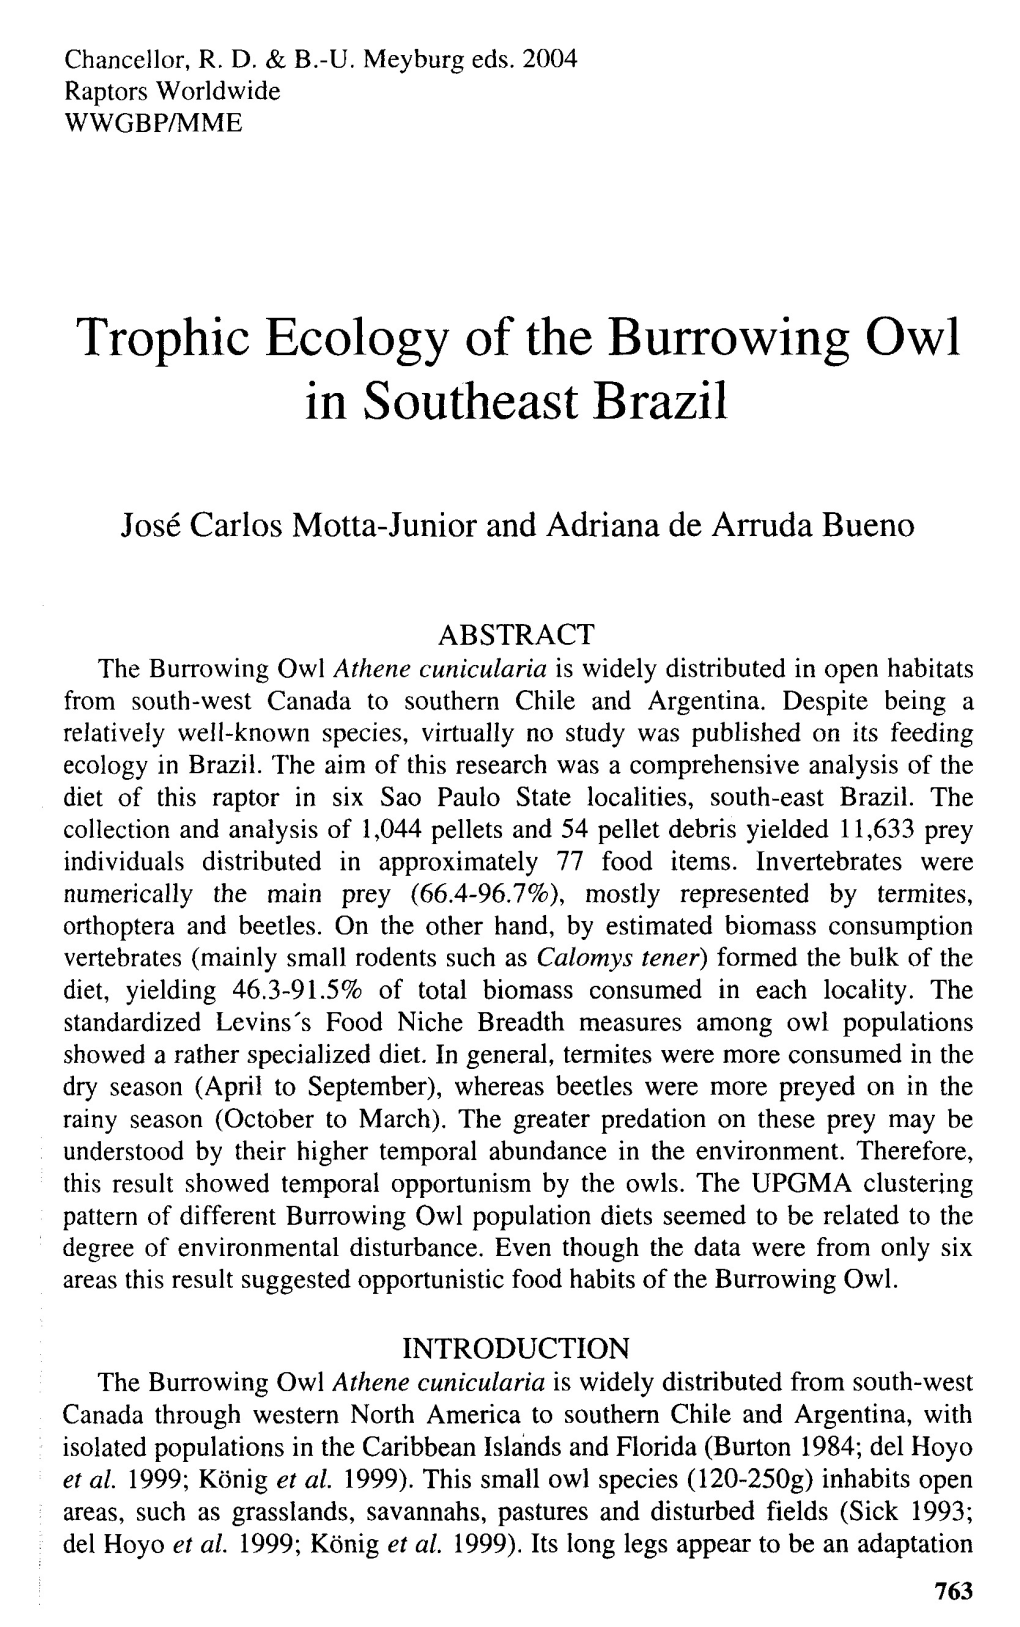 Trophic Ecology of the Burrowing Owl in Southeast Brazil